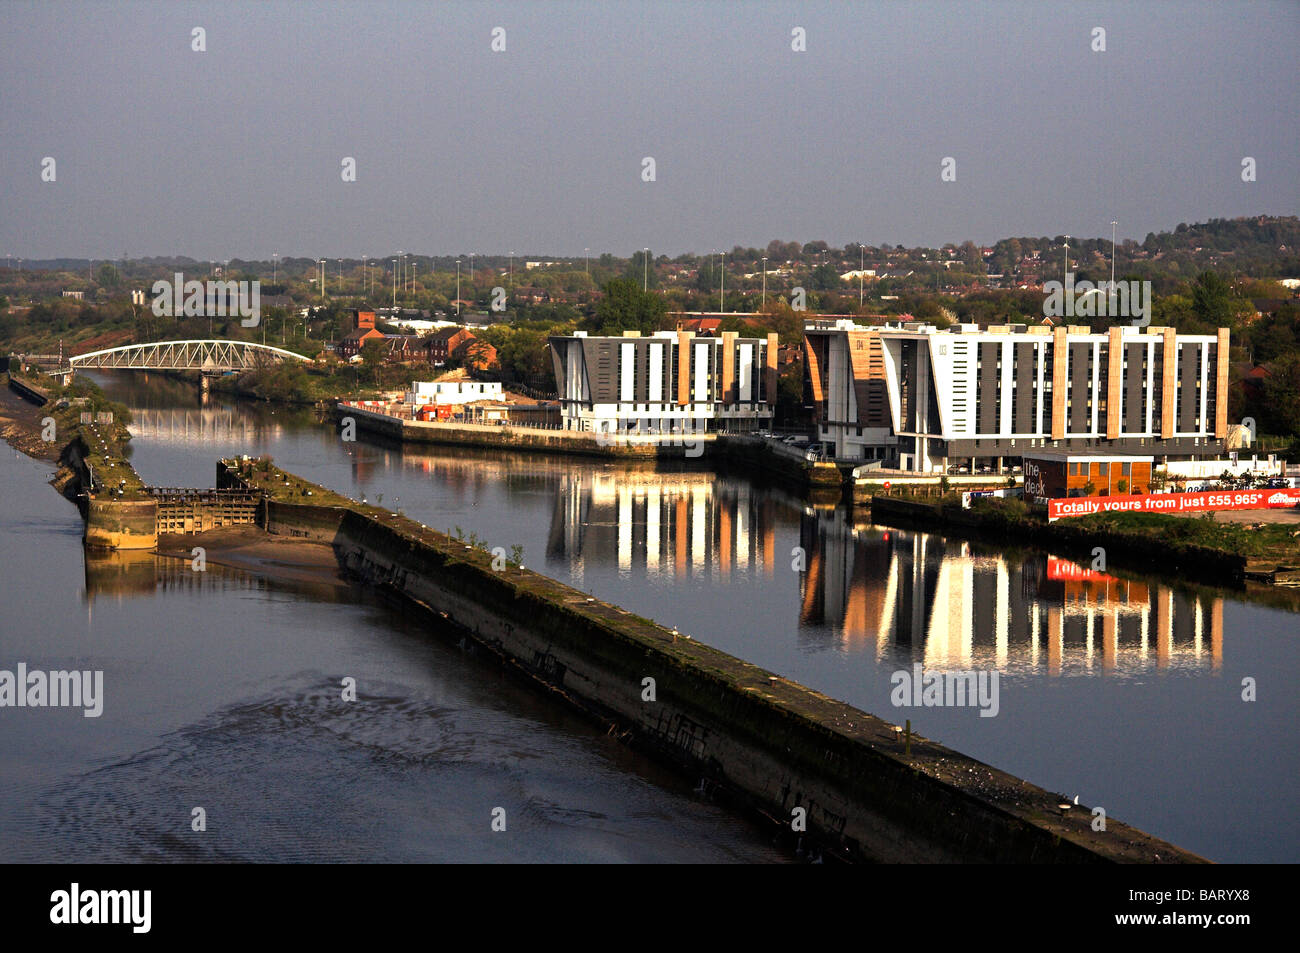 Modern apartments on the Manchester Ship Canal, taken from the Runcorn Bridge, Widnes, Cheshire, UK Stock Photo